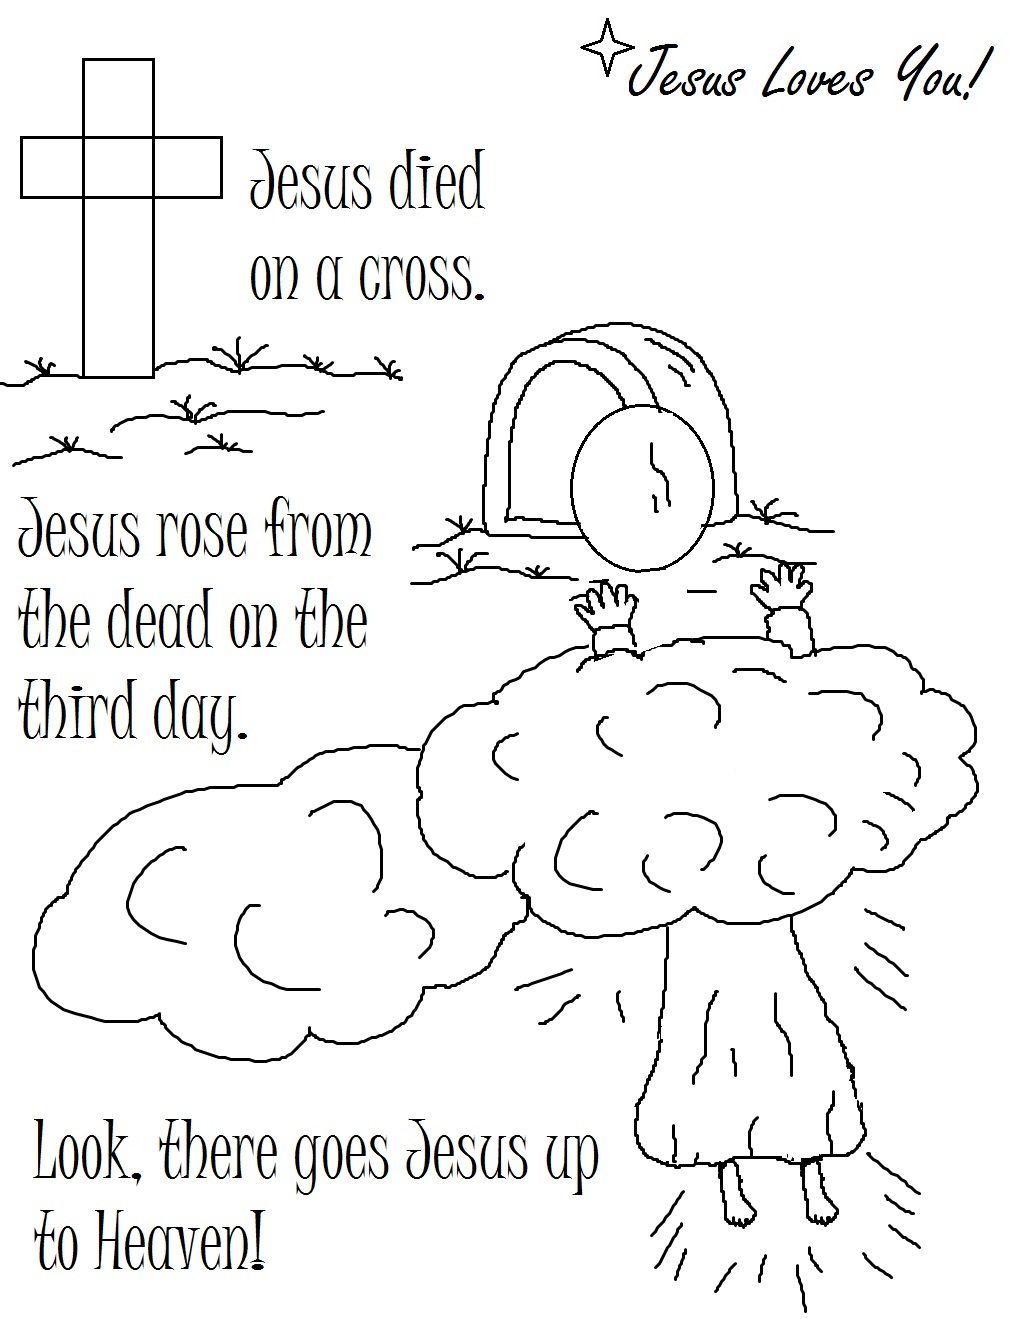  Free Printable Christian Coloring Pages For Kids for Adult